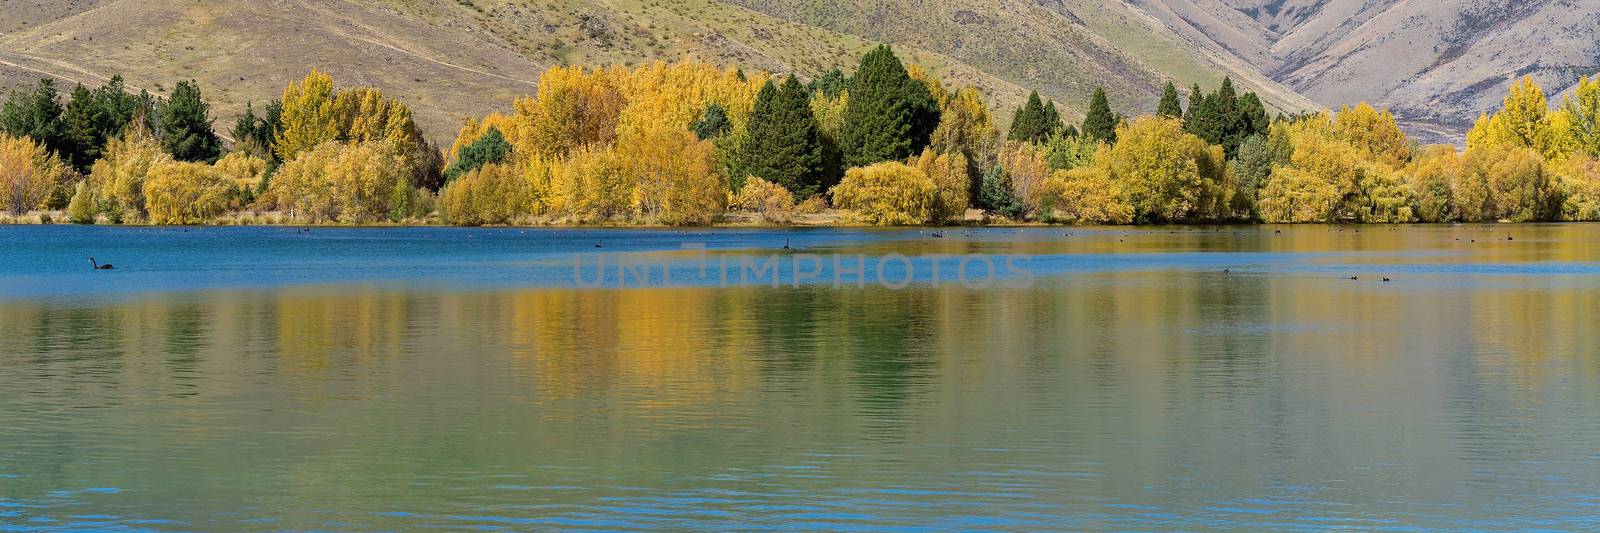 Autumn Foliage Reflected In The Still Water Of A Blue Lake by 	JacksonStock